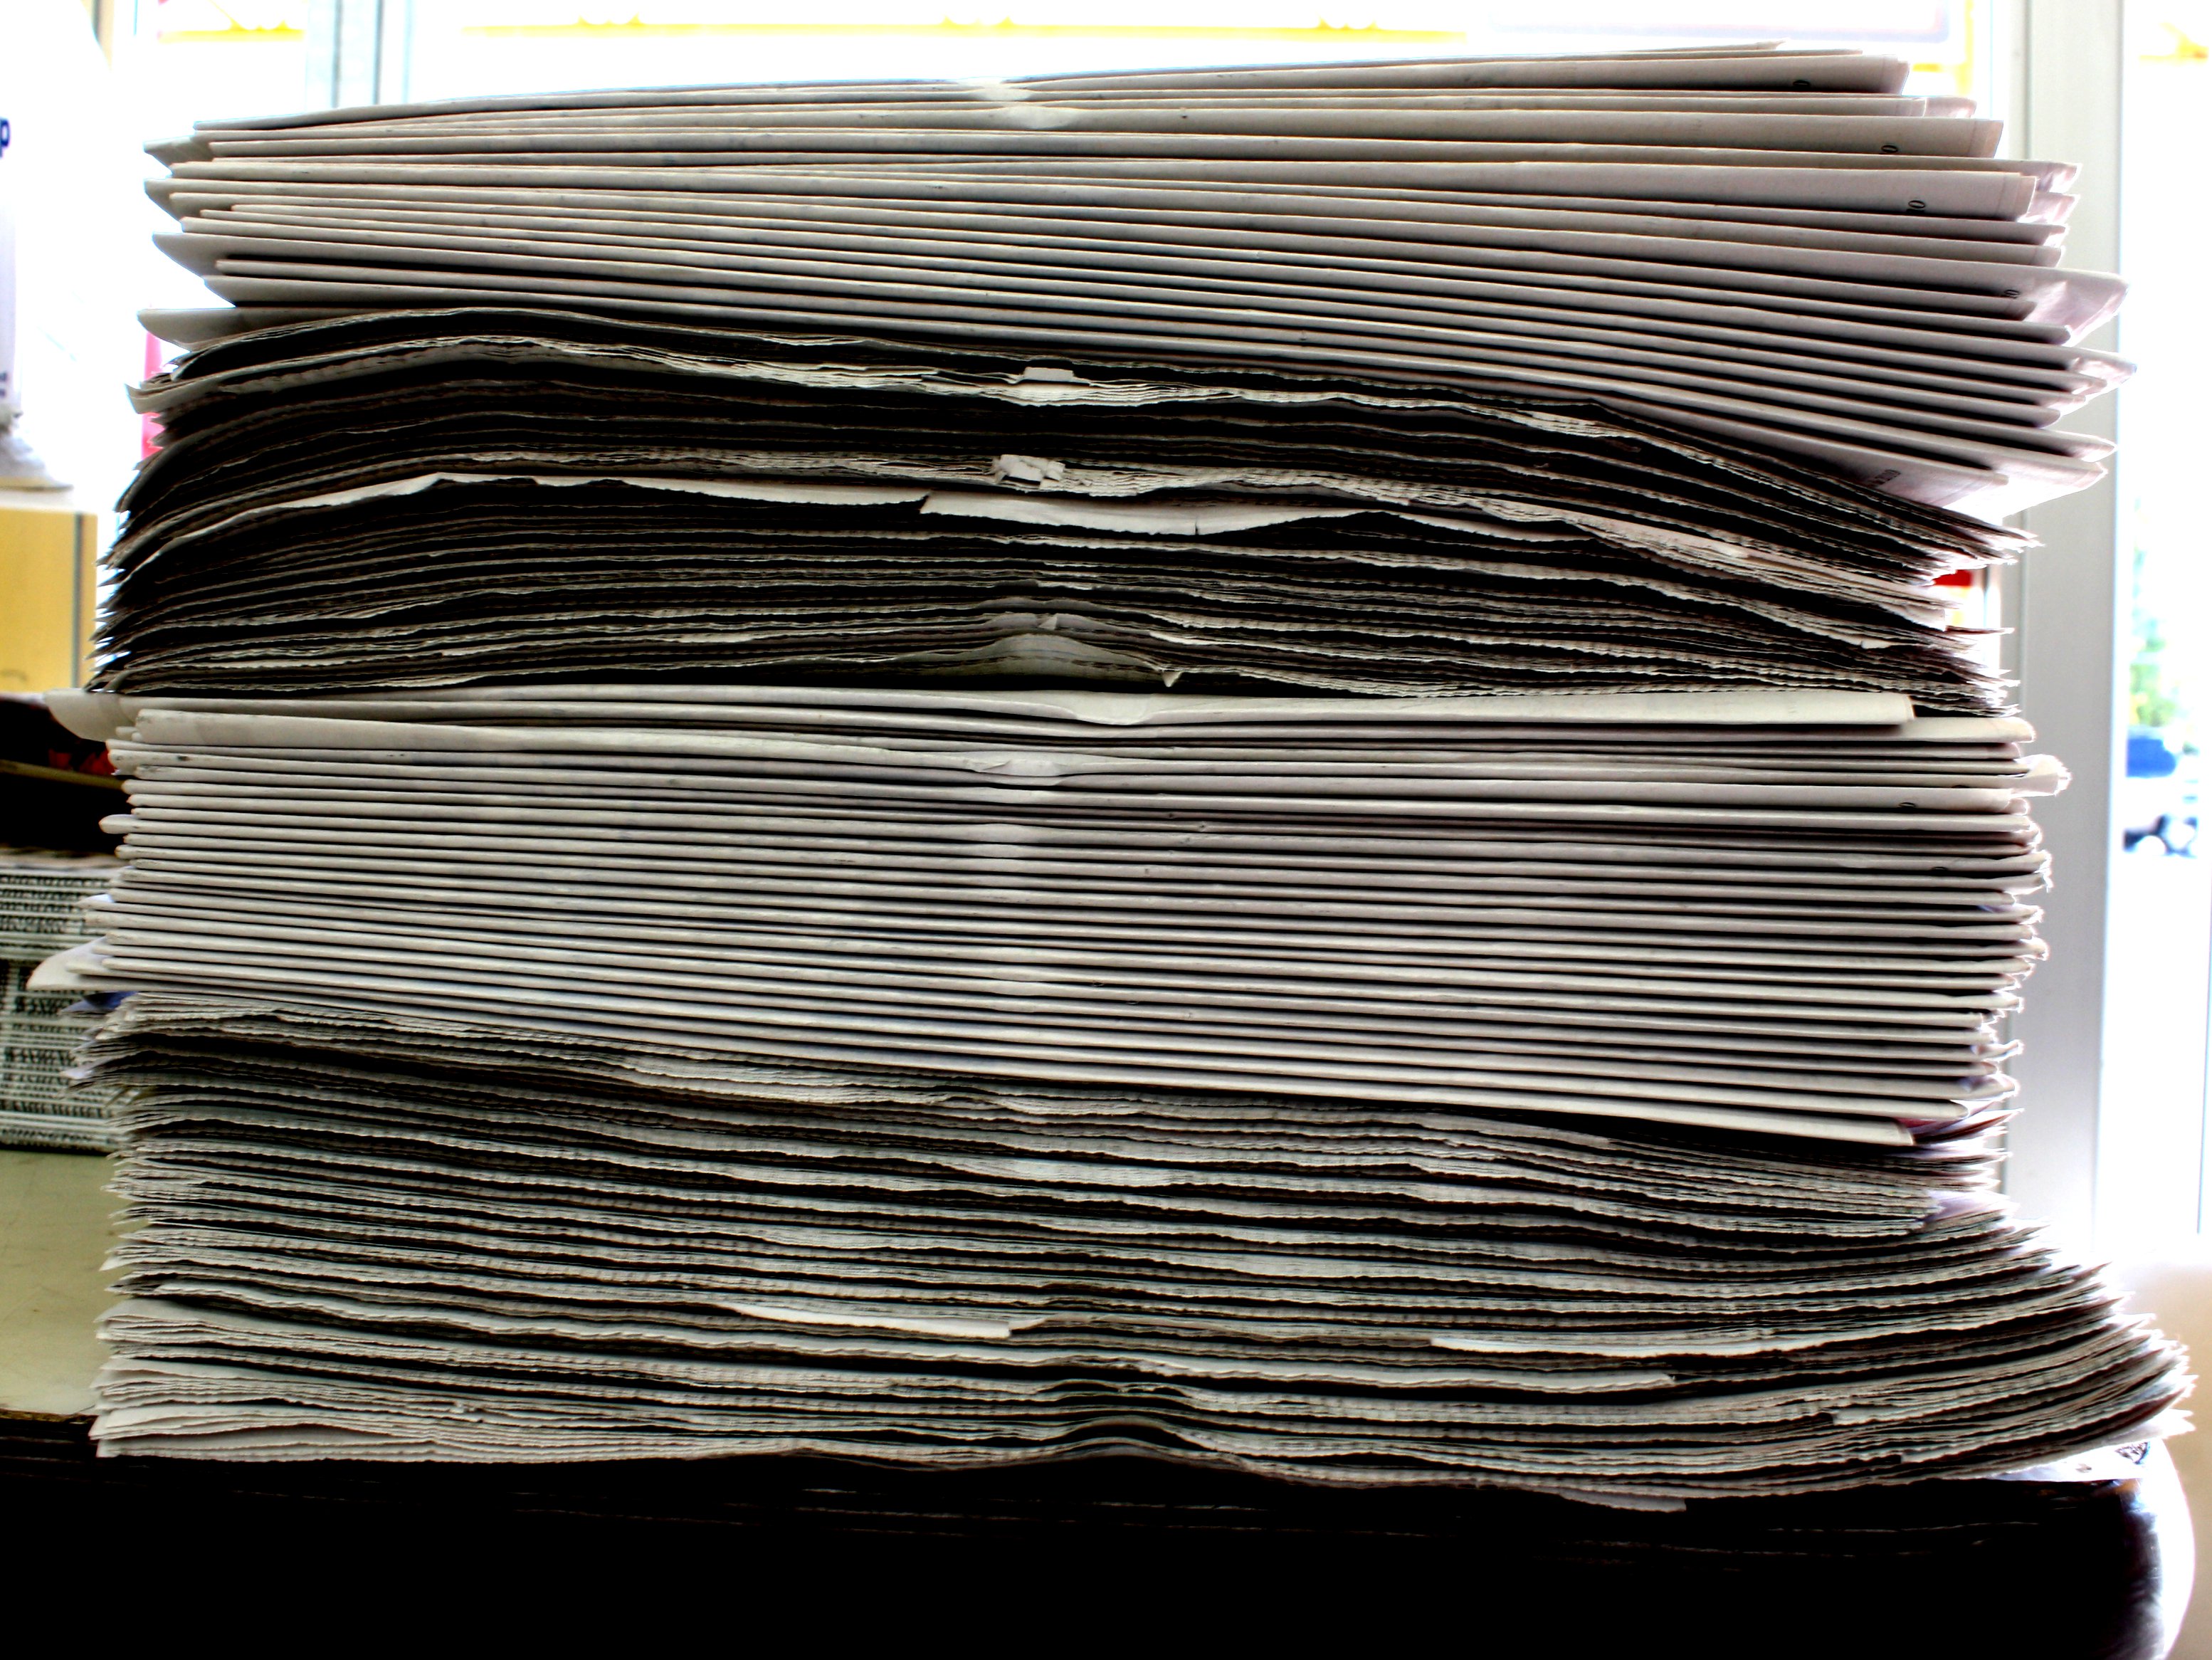 Stack of Newspapers Picture | Free Photograph | Photos Public Domain